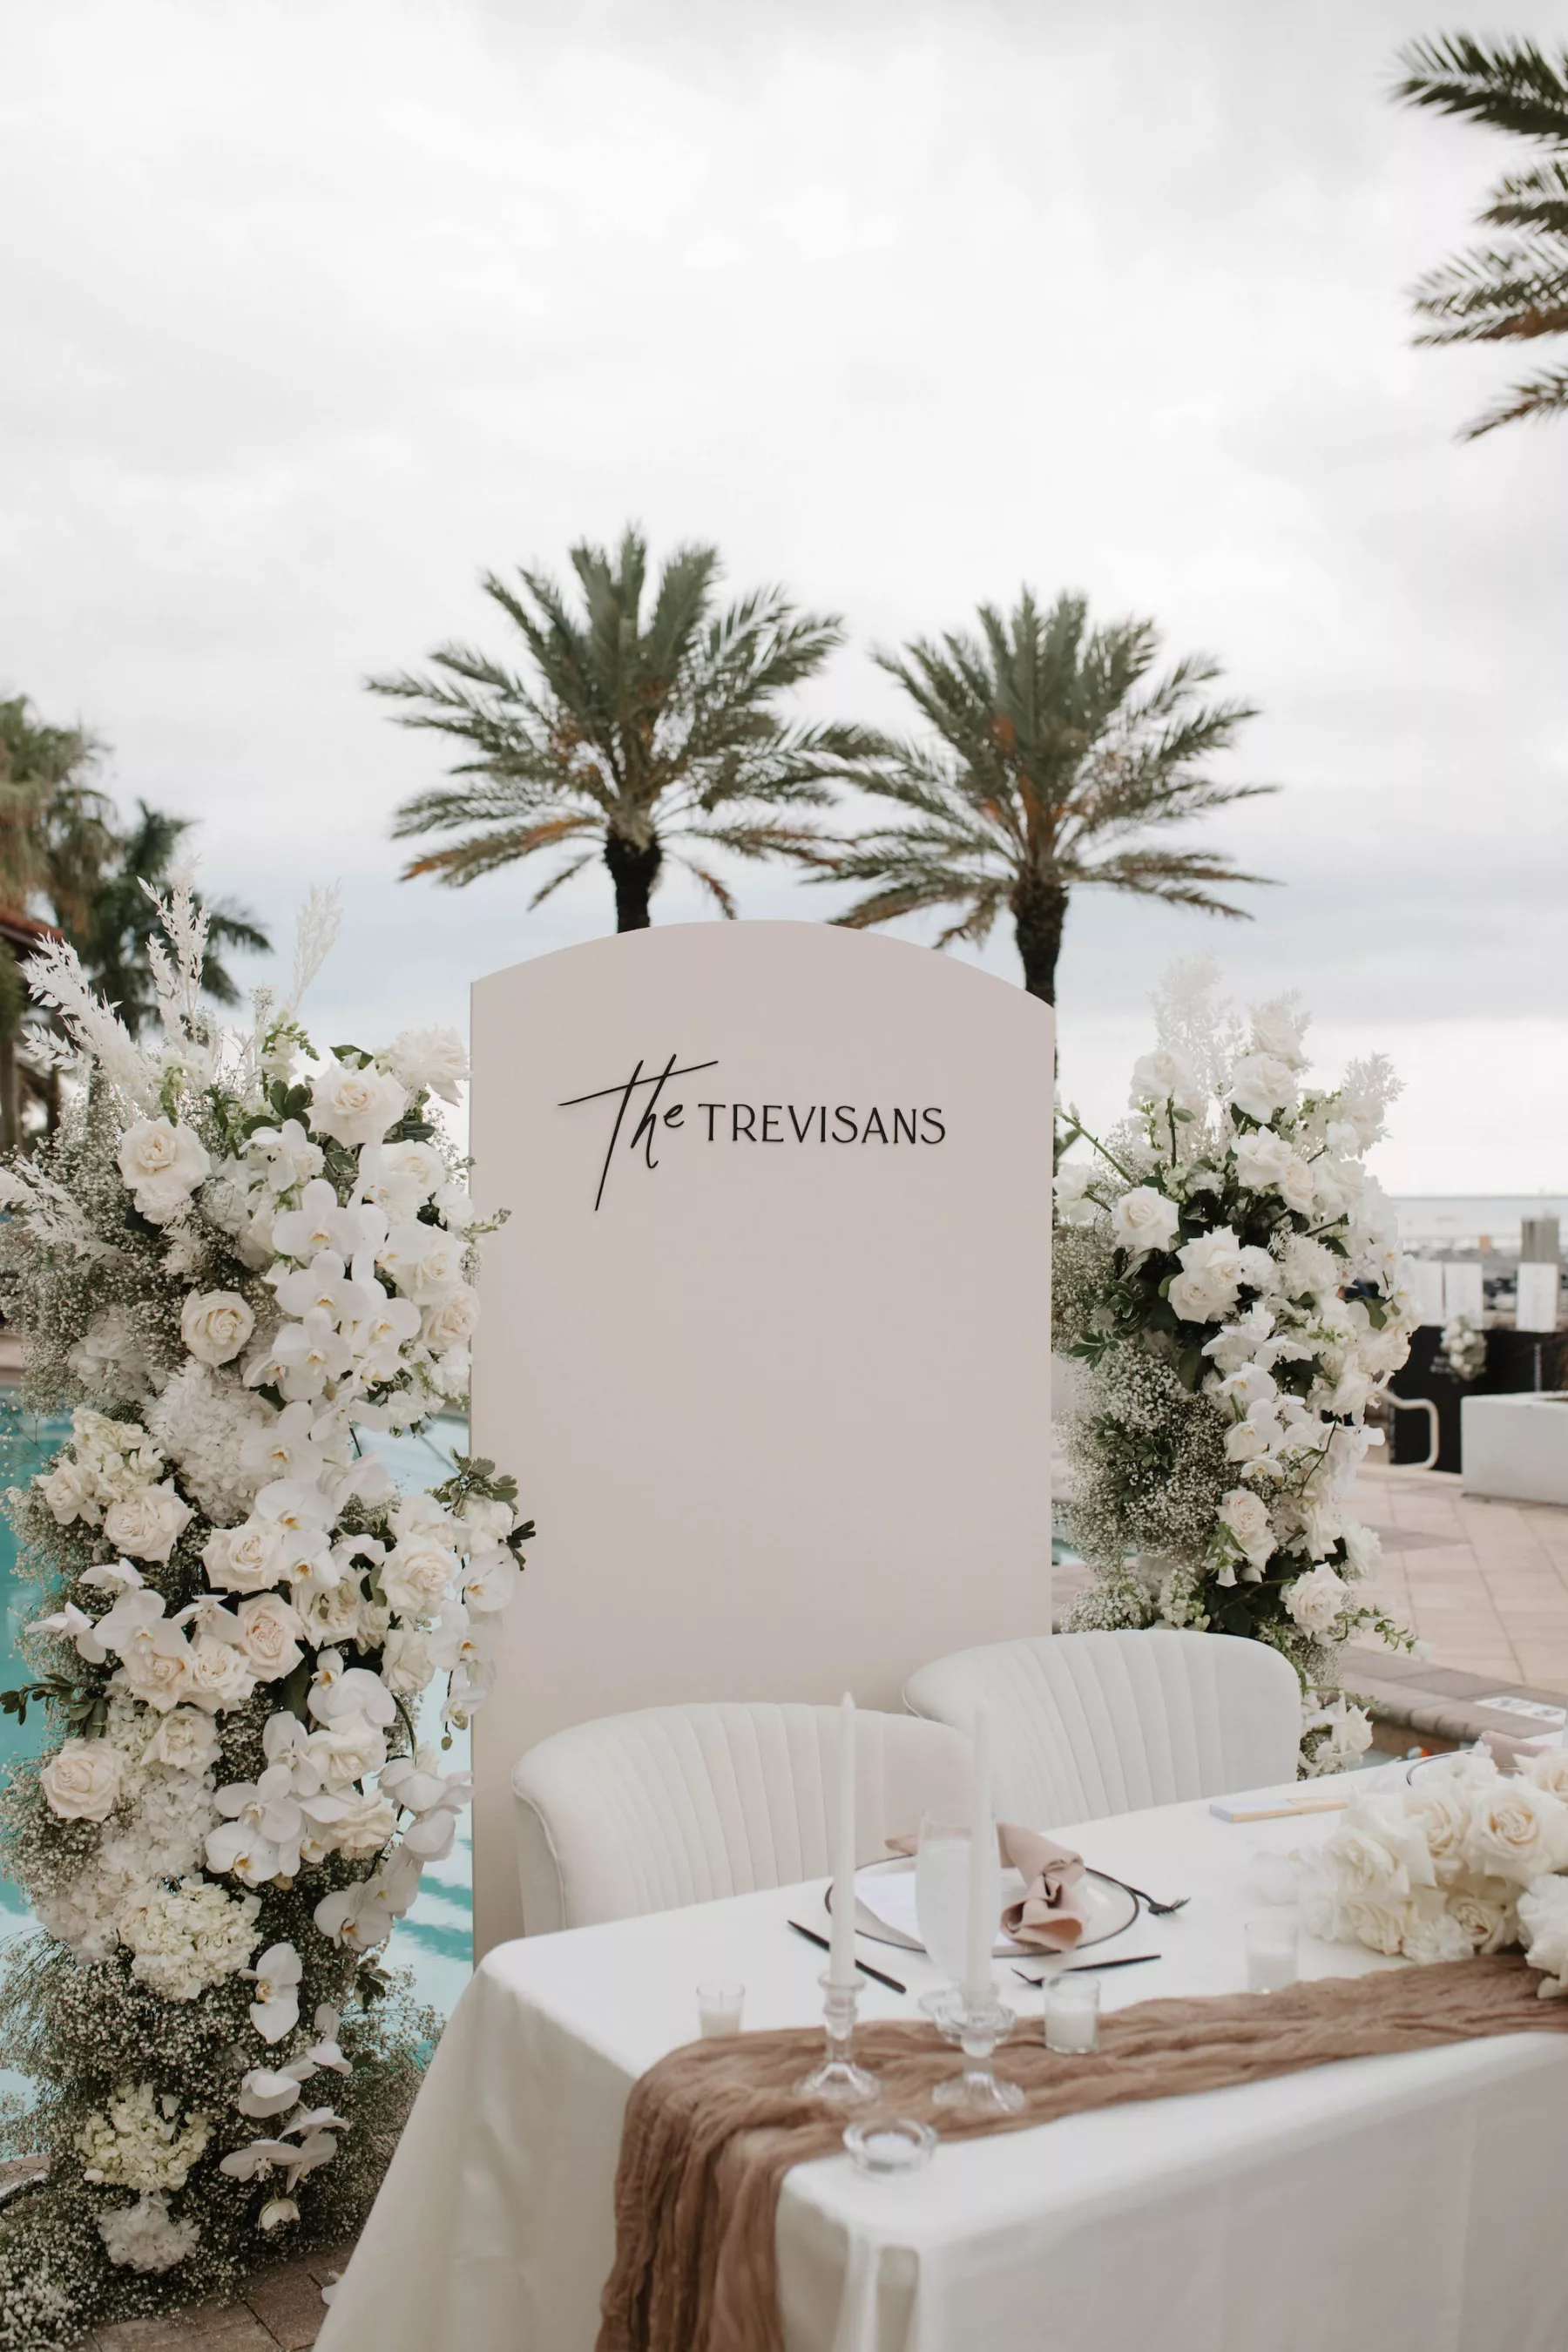 Modern Monochromatic Outdoor Oceanview Spring Wedding Reception Sweetheart Table Decor Inspiration | White Arch Backdrop | Tall Flower Arrangements with White Roses, Carnations, Baby's Breath, and Orchids | White Velvet Chairs | Tampa Bay Kate Ryan Event Rentals | Venue Westshore Yacht Club